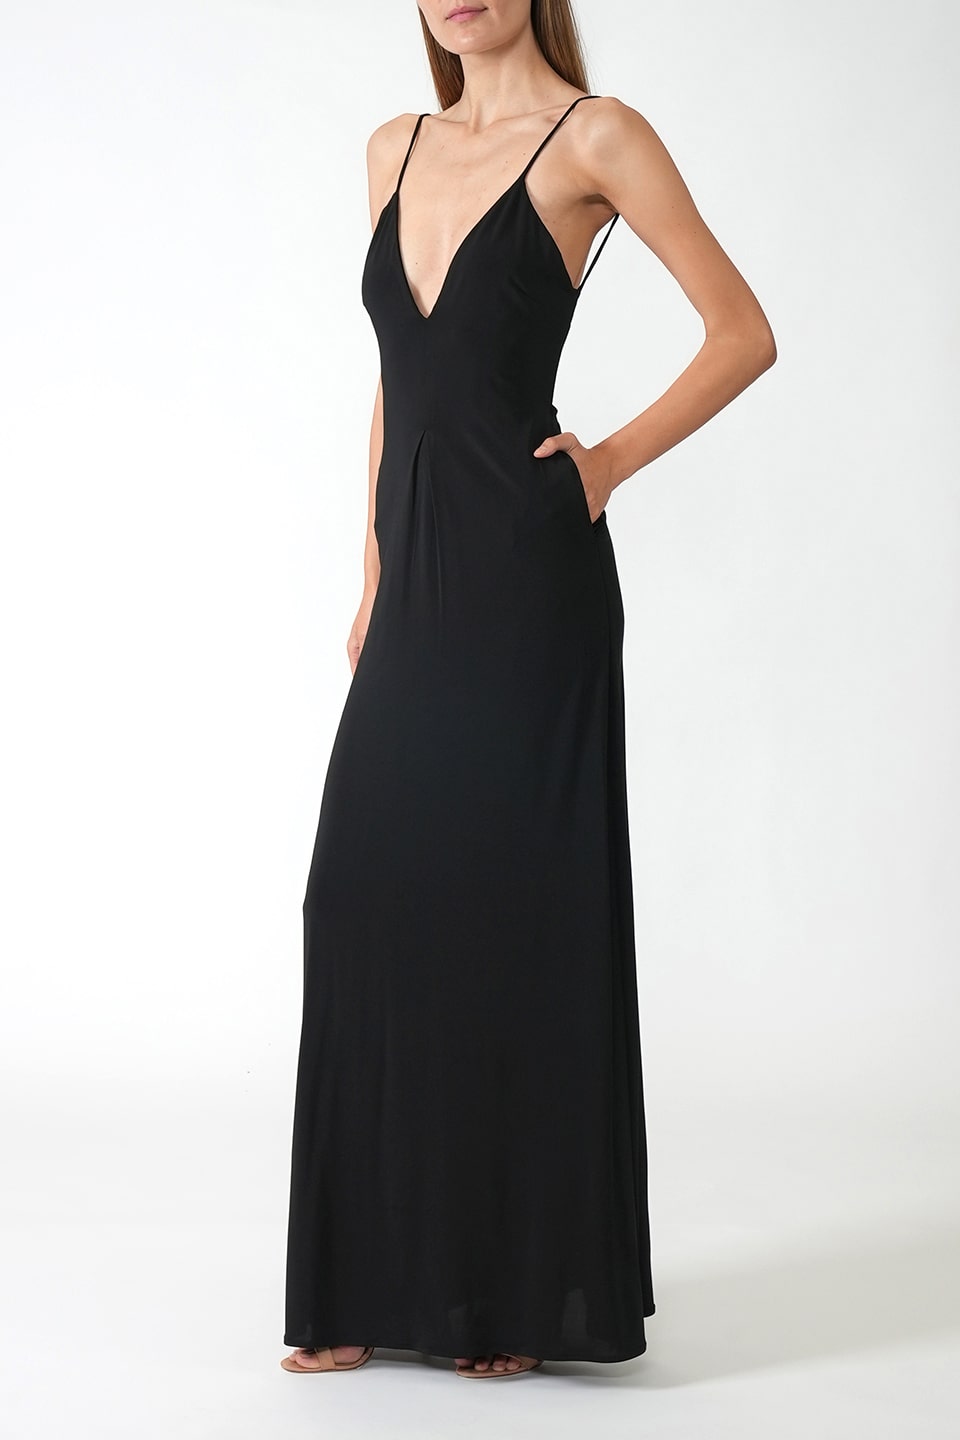 Designer Black Maxi dresses, shop online with free delivery in UAE. Product gallery 2